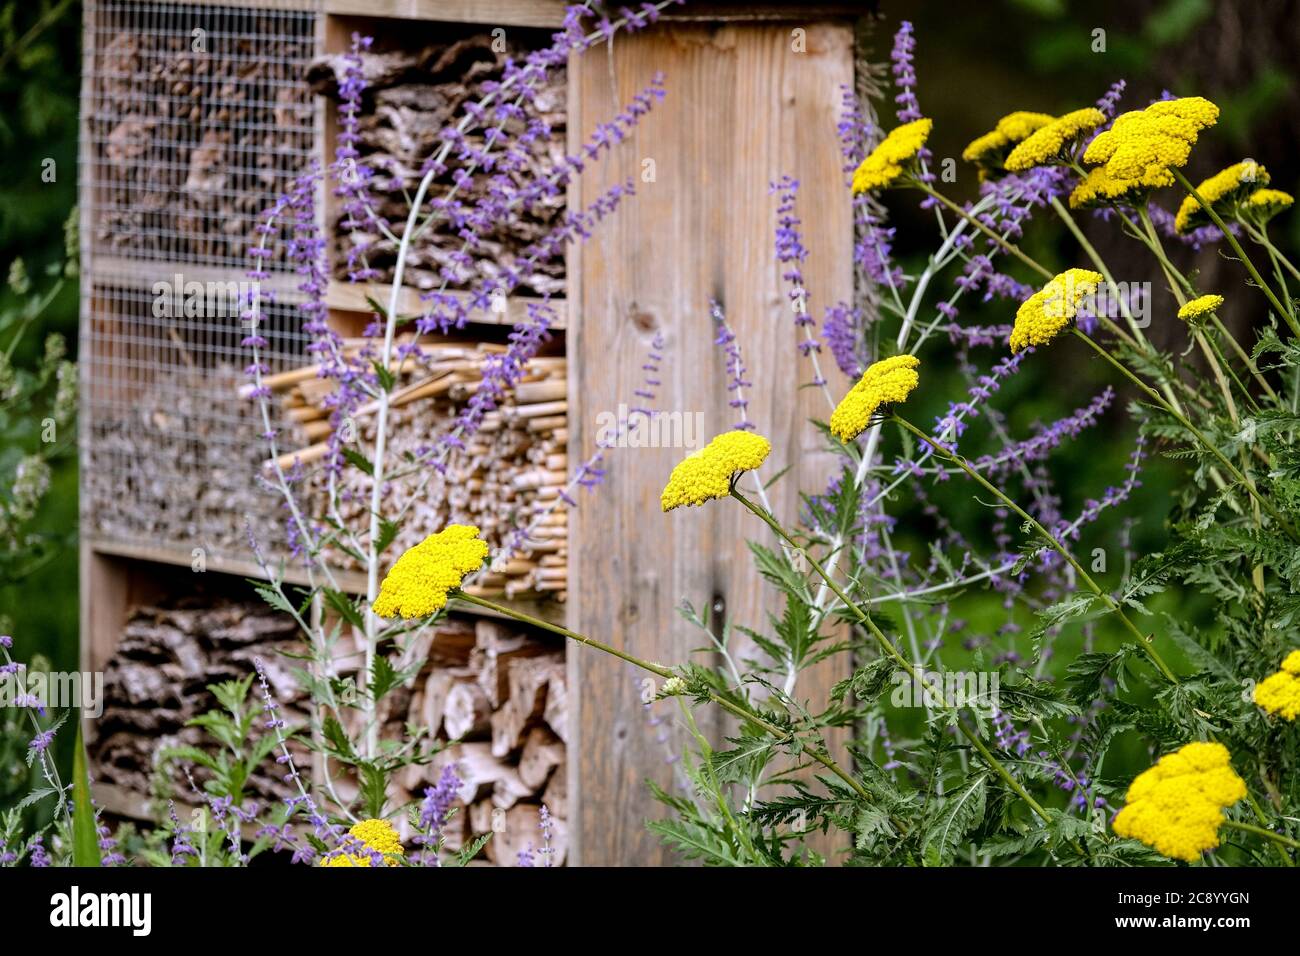 Garden bee hotel in flowers Refuge place for solitary bees, beneficial insects, wildlife-friendly Stock Photo